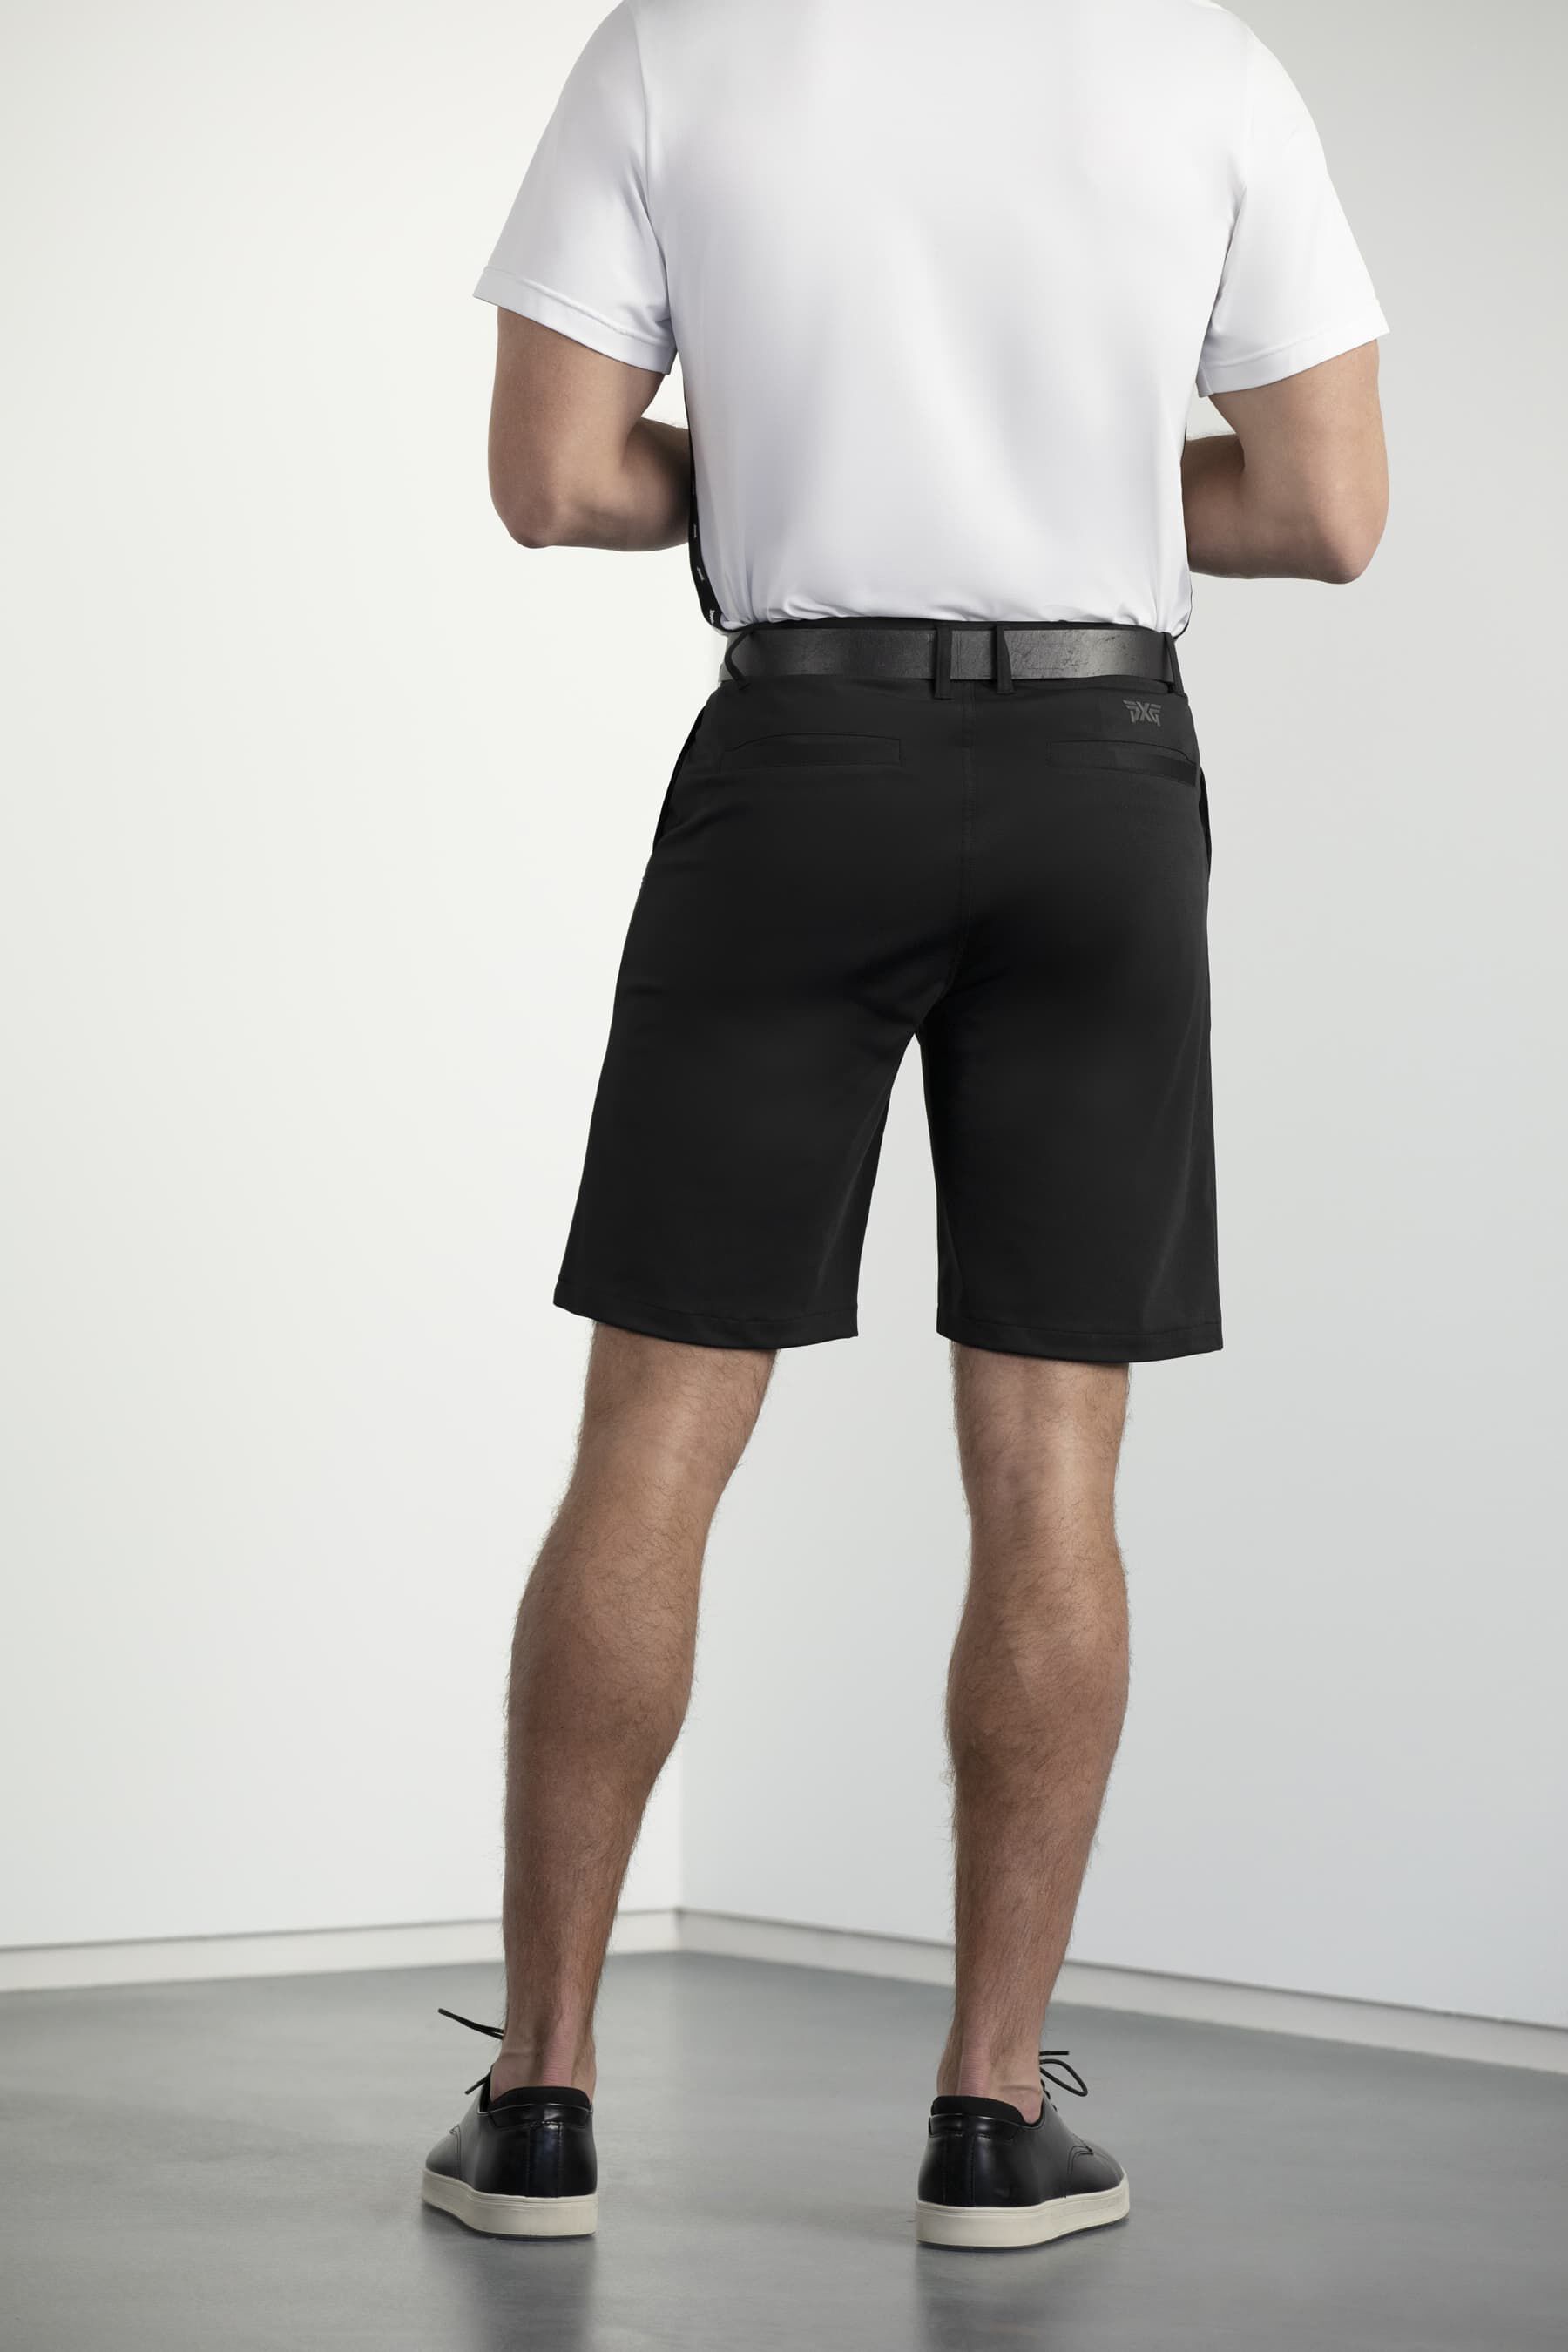 Essential Golf Shorts | Men's Golf Pants and Shorts | PXG